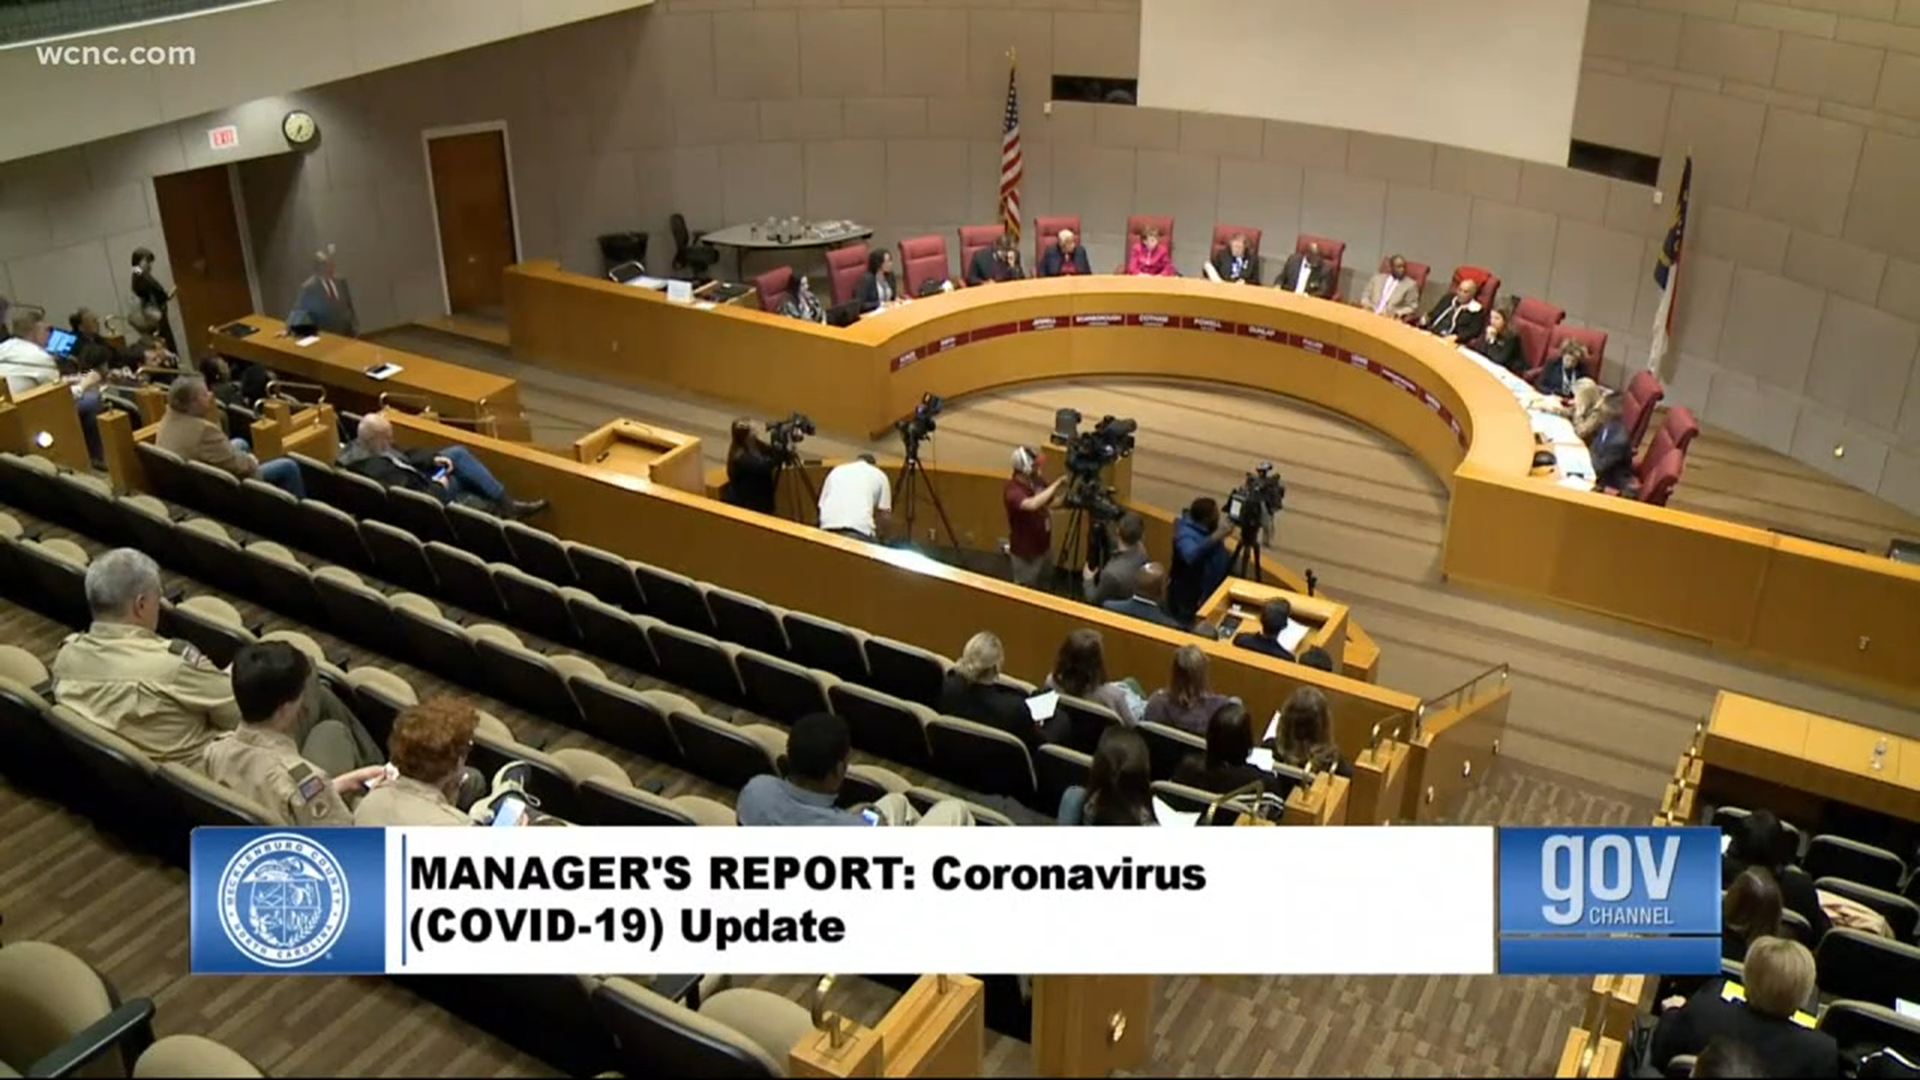 More than 1,000 public records, released to WCNC Charlotte this week, detail Mecklenburg County's COVID-19 planning before its first positive case.